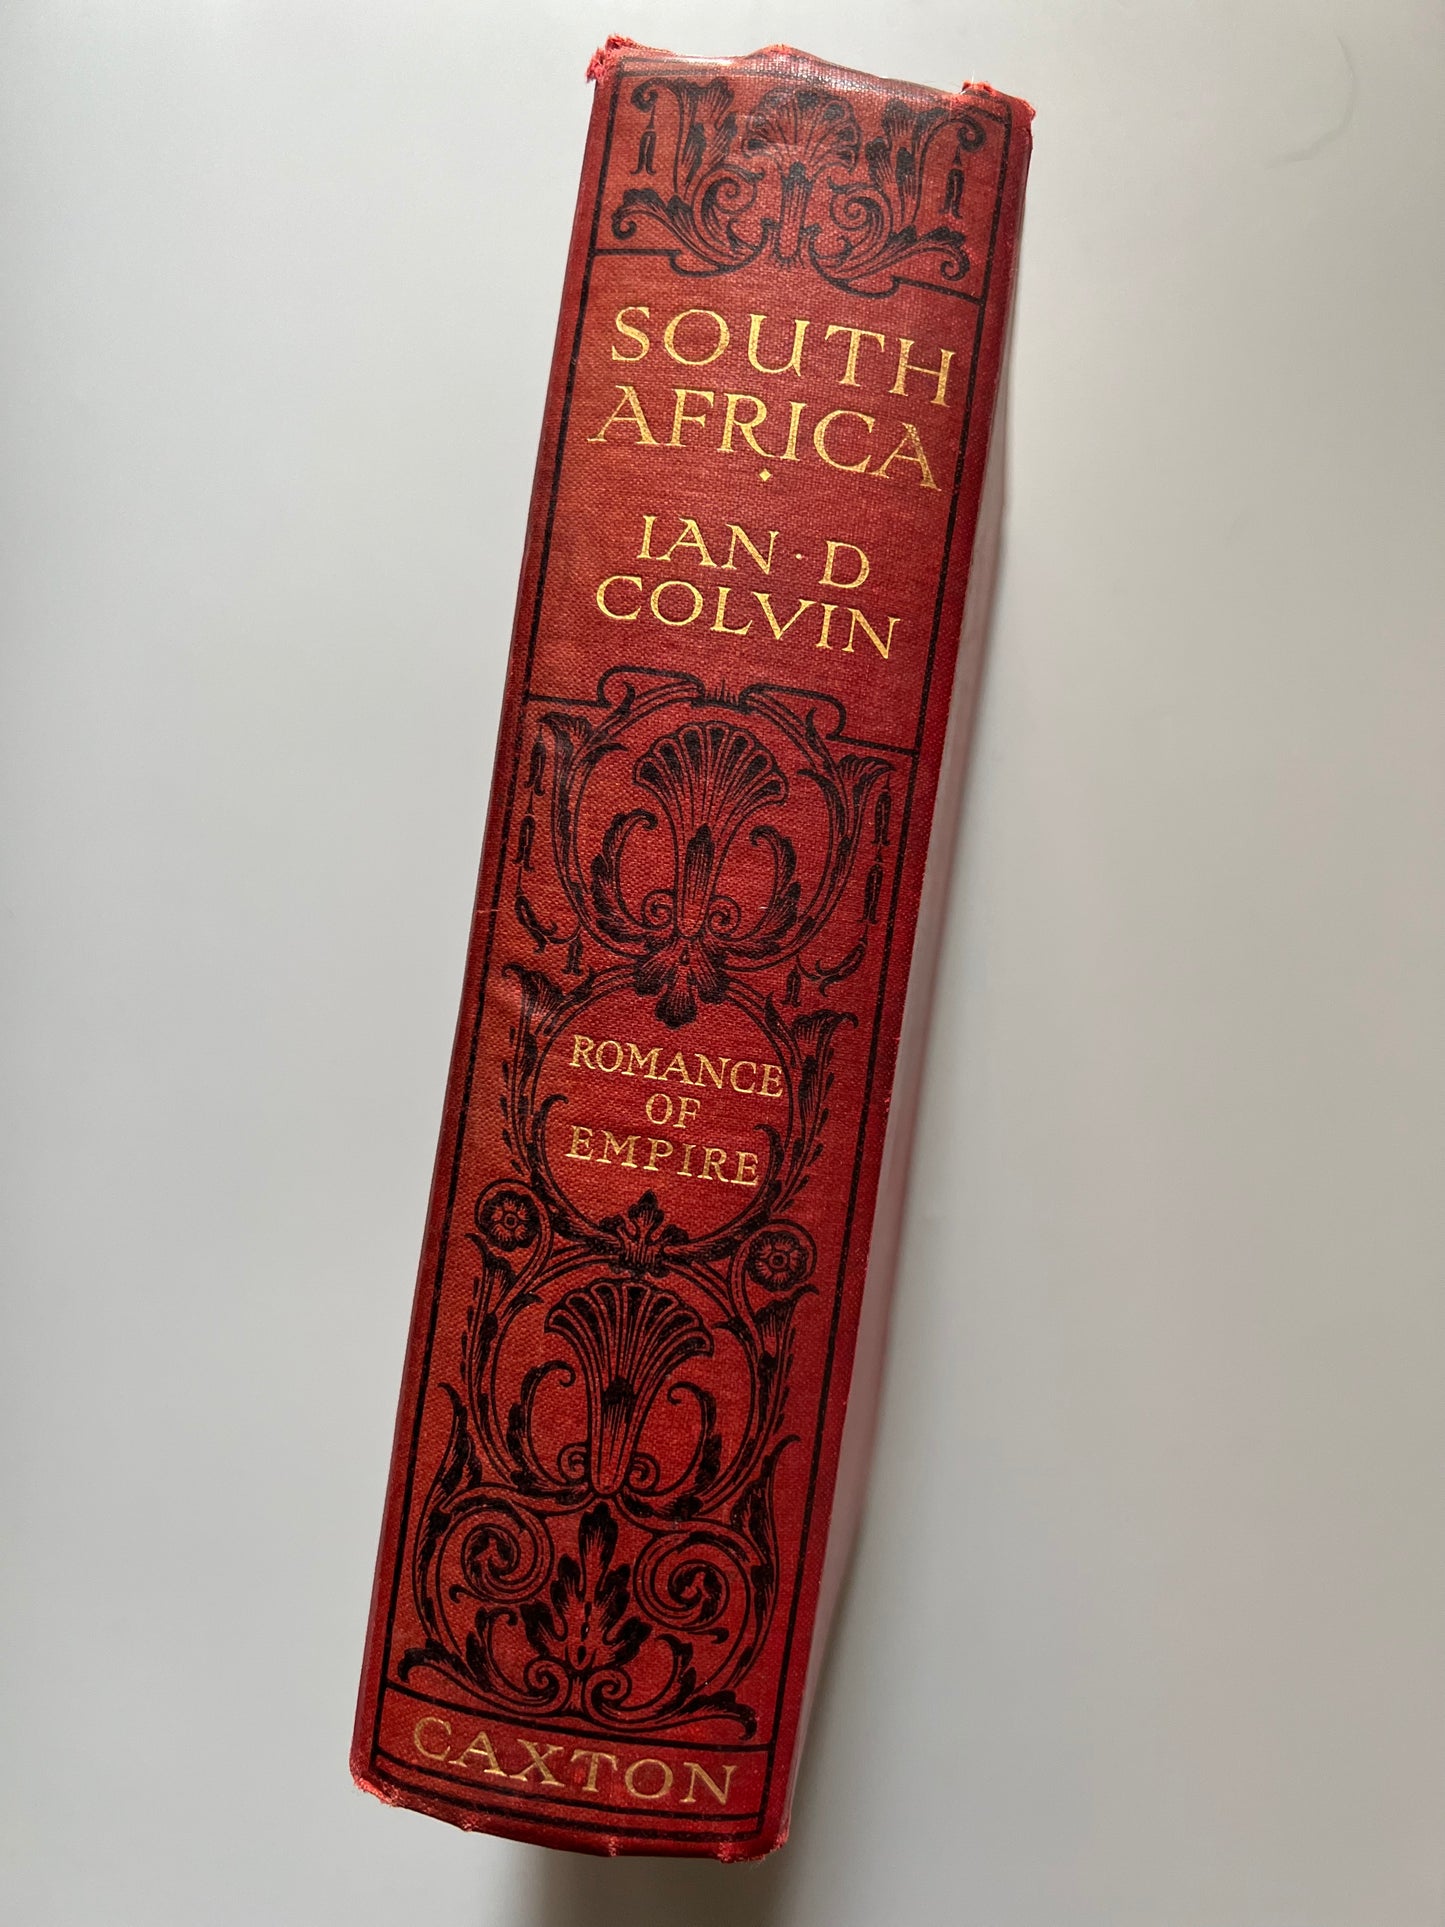 Romance of empire, South Africa, Ian D. Colvin - The Claxton publishing company, ca. 1920